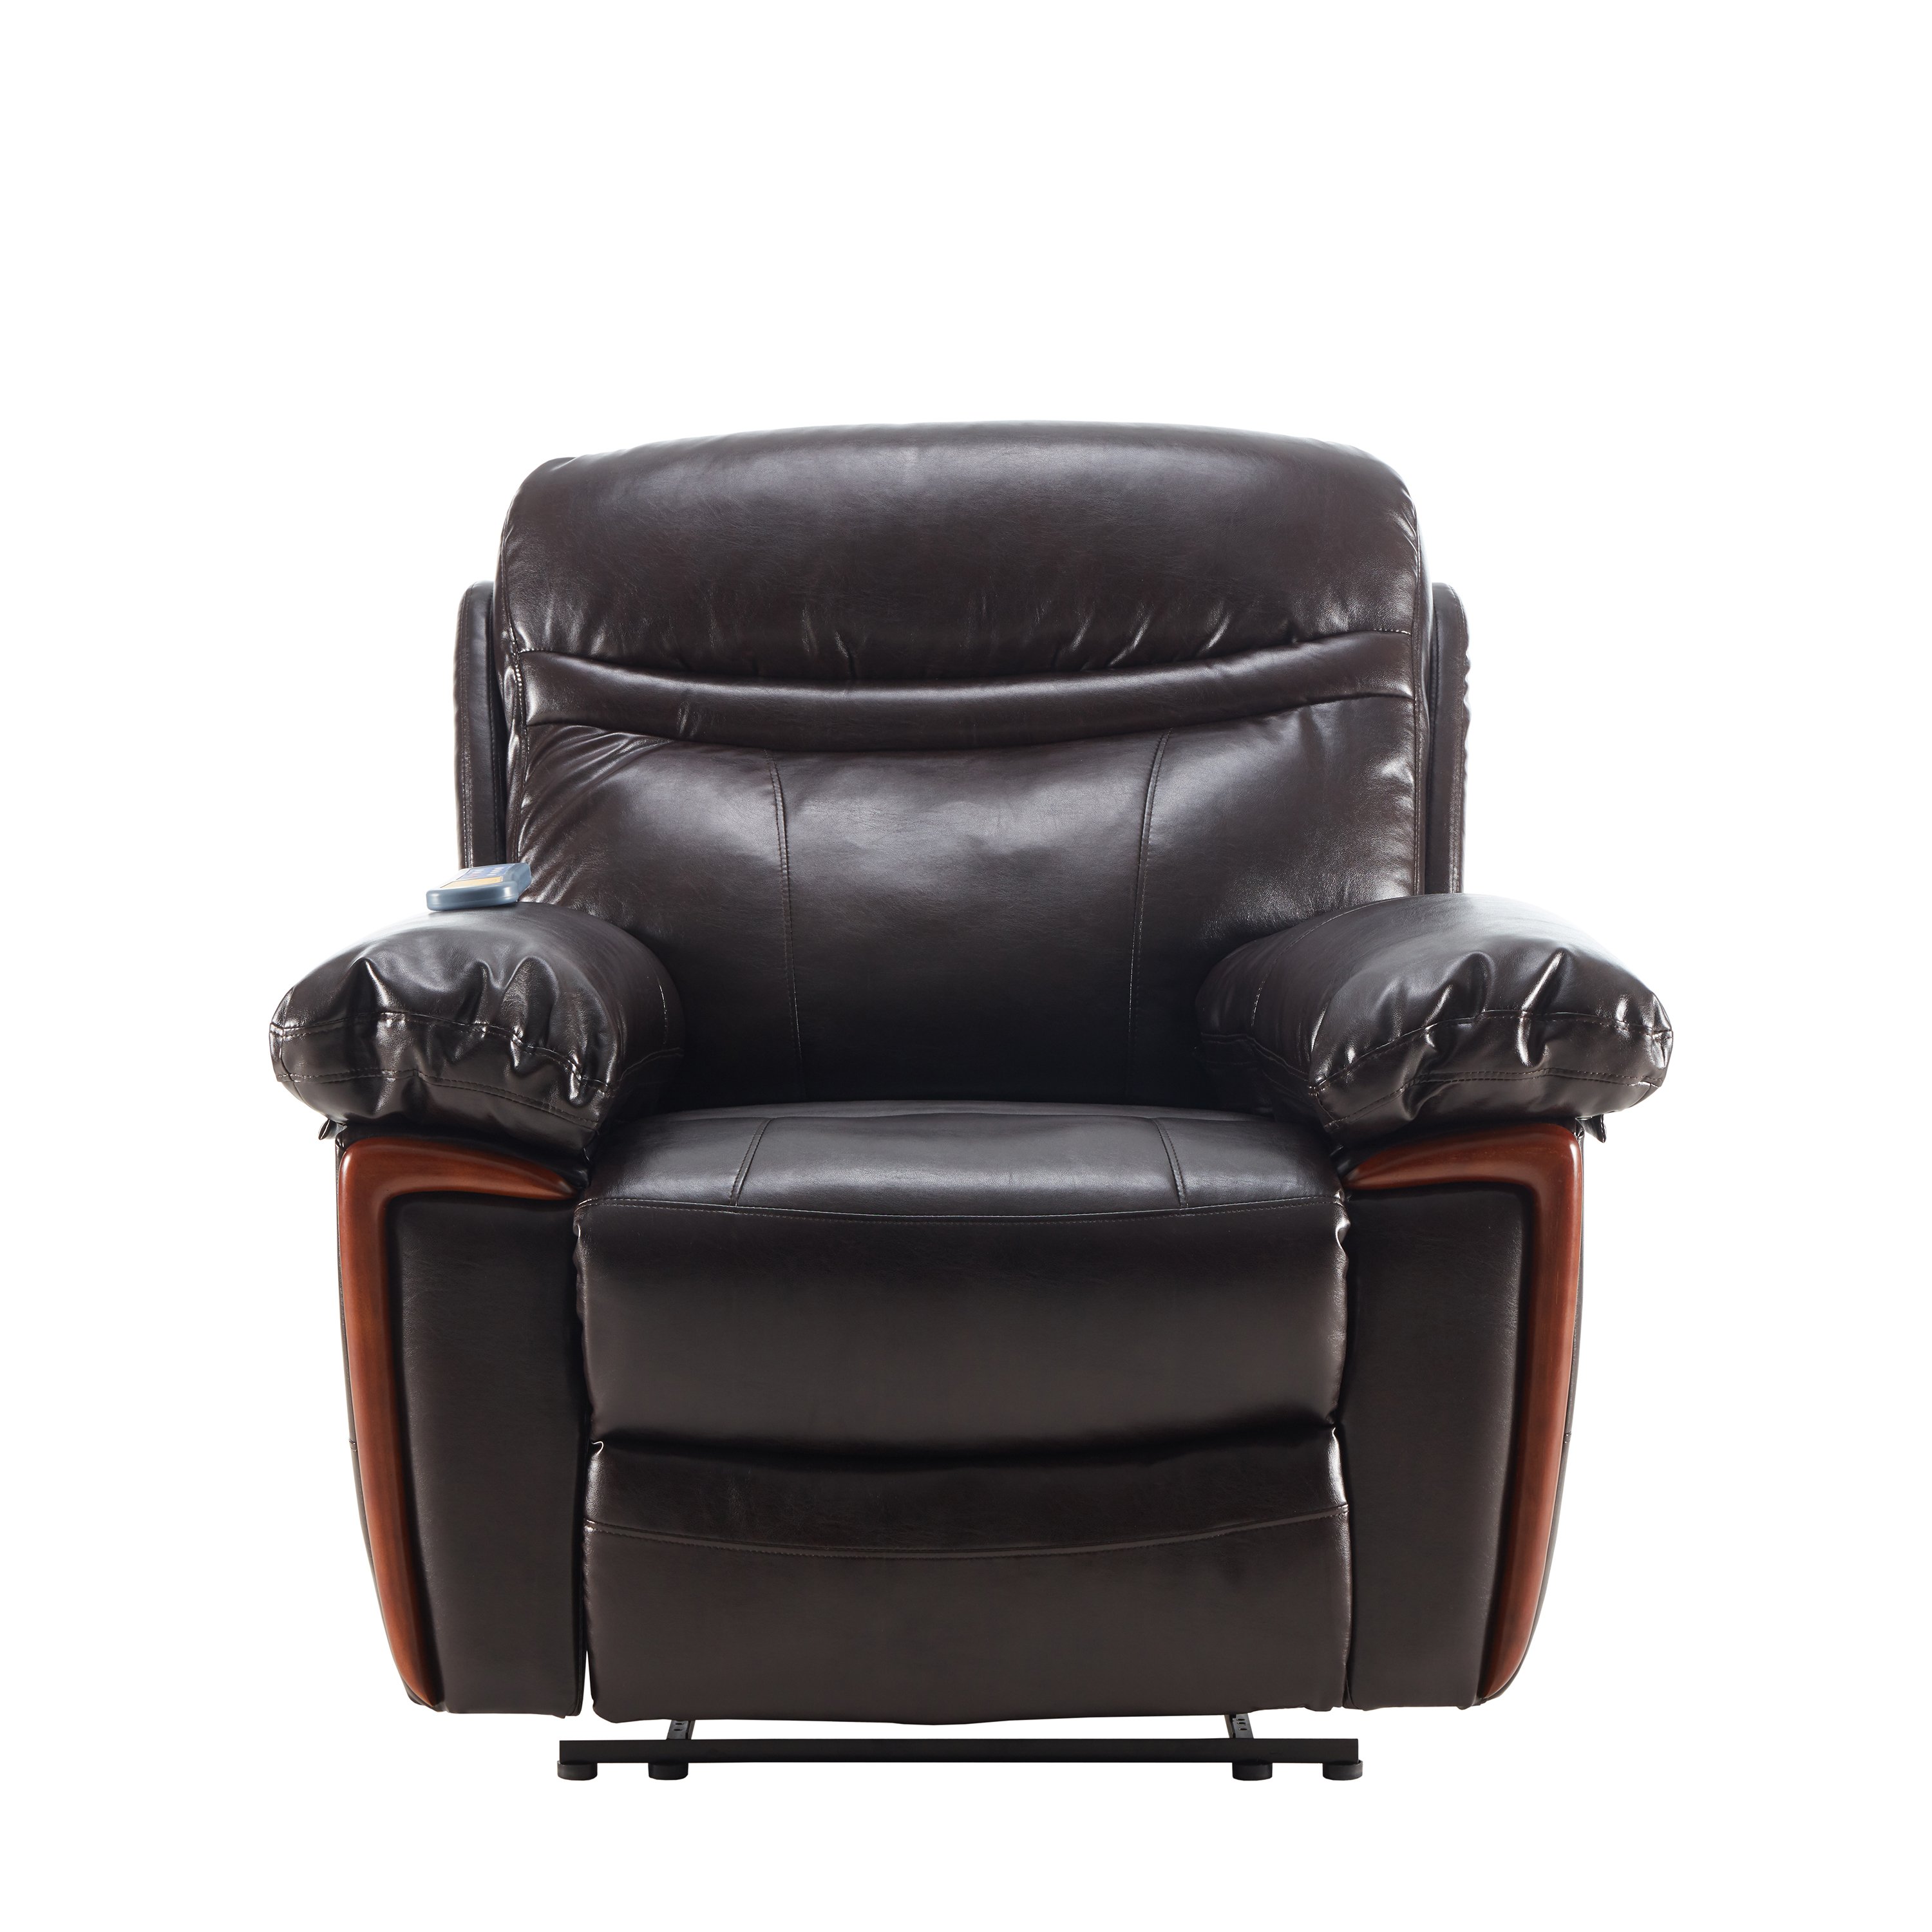 Massage Recliner PU Leather Sofa Chair with Heating and Massage Vibrating Function-CASAINC